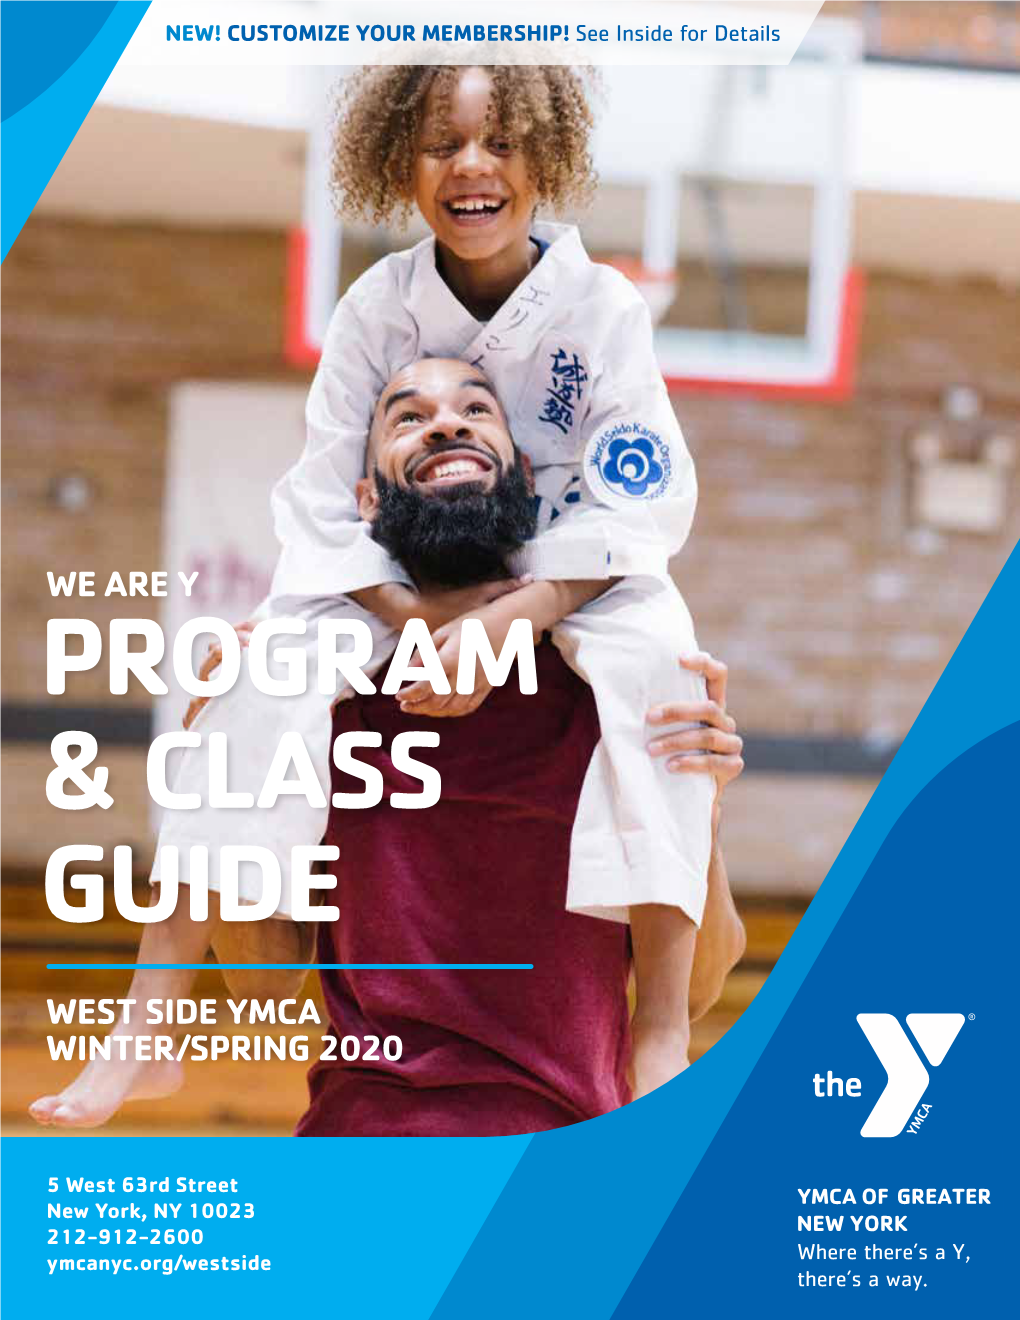 West Side Ymca Winter/Spring 2020 We Are Y